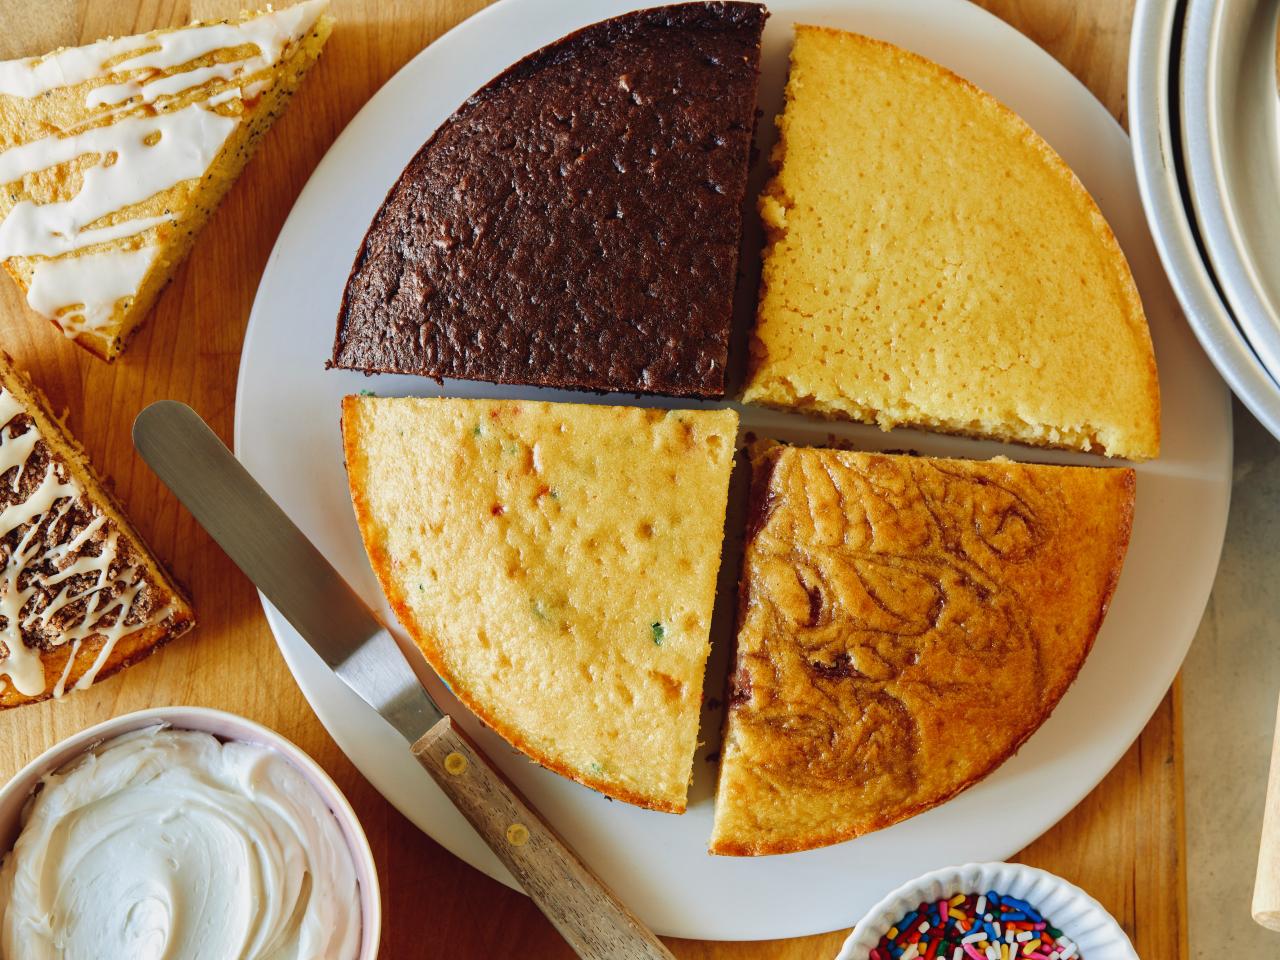 14 Types of Cake for Different Tastes to Bake Right Now - Parade